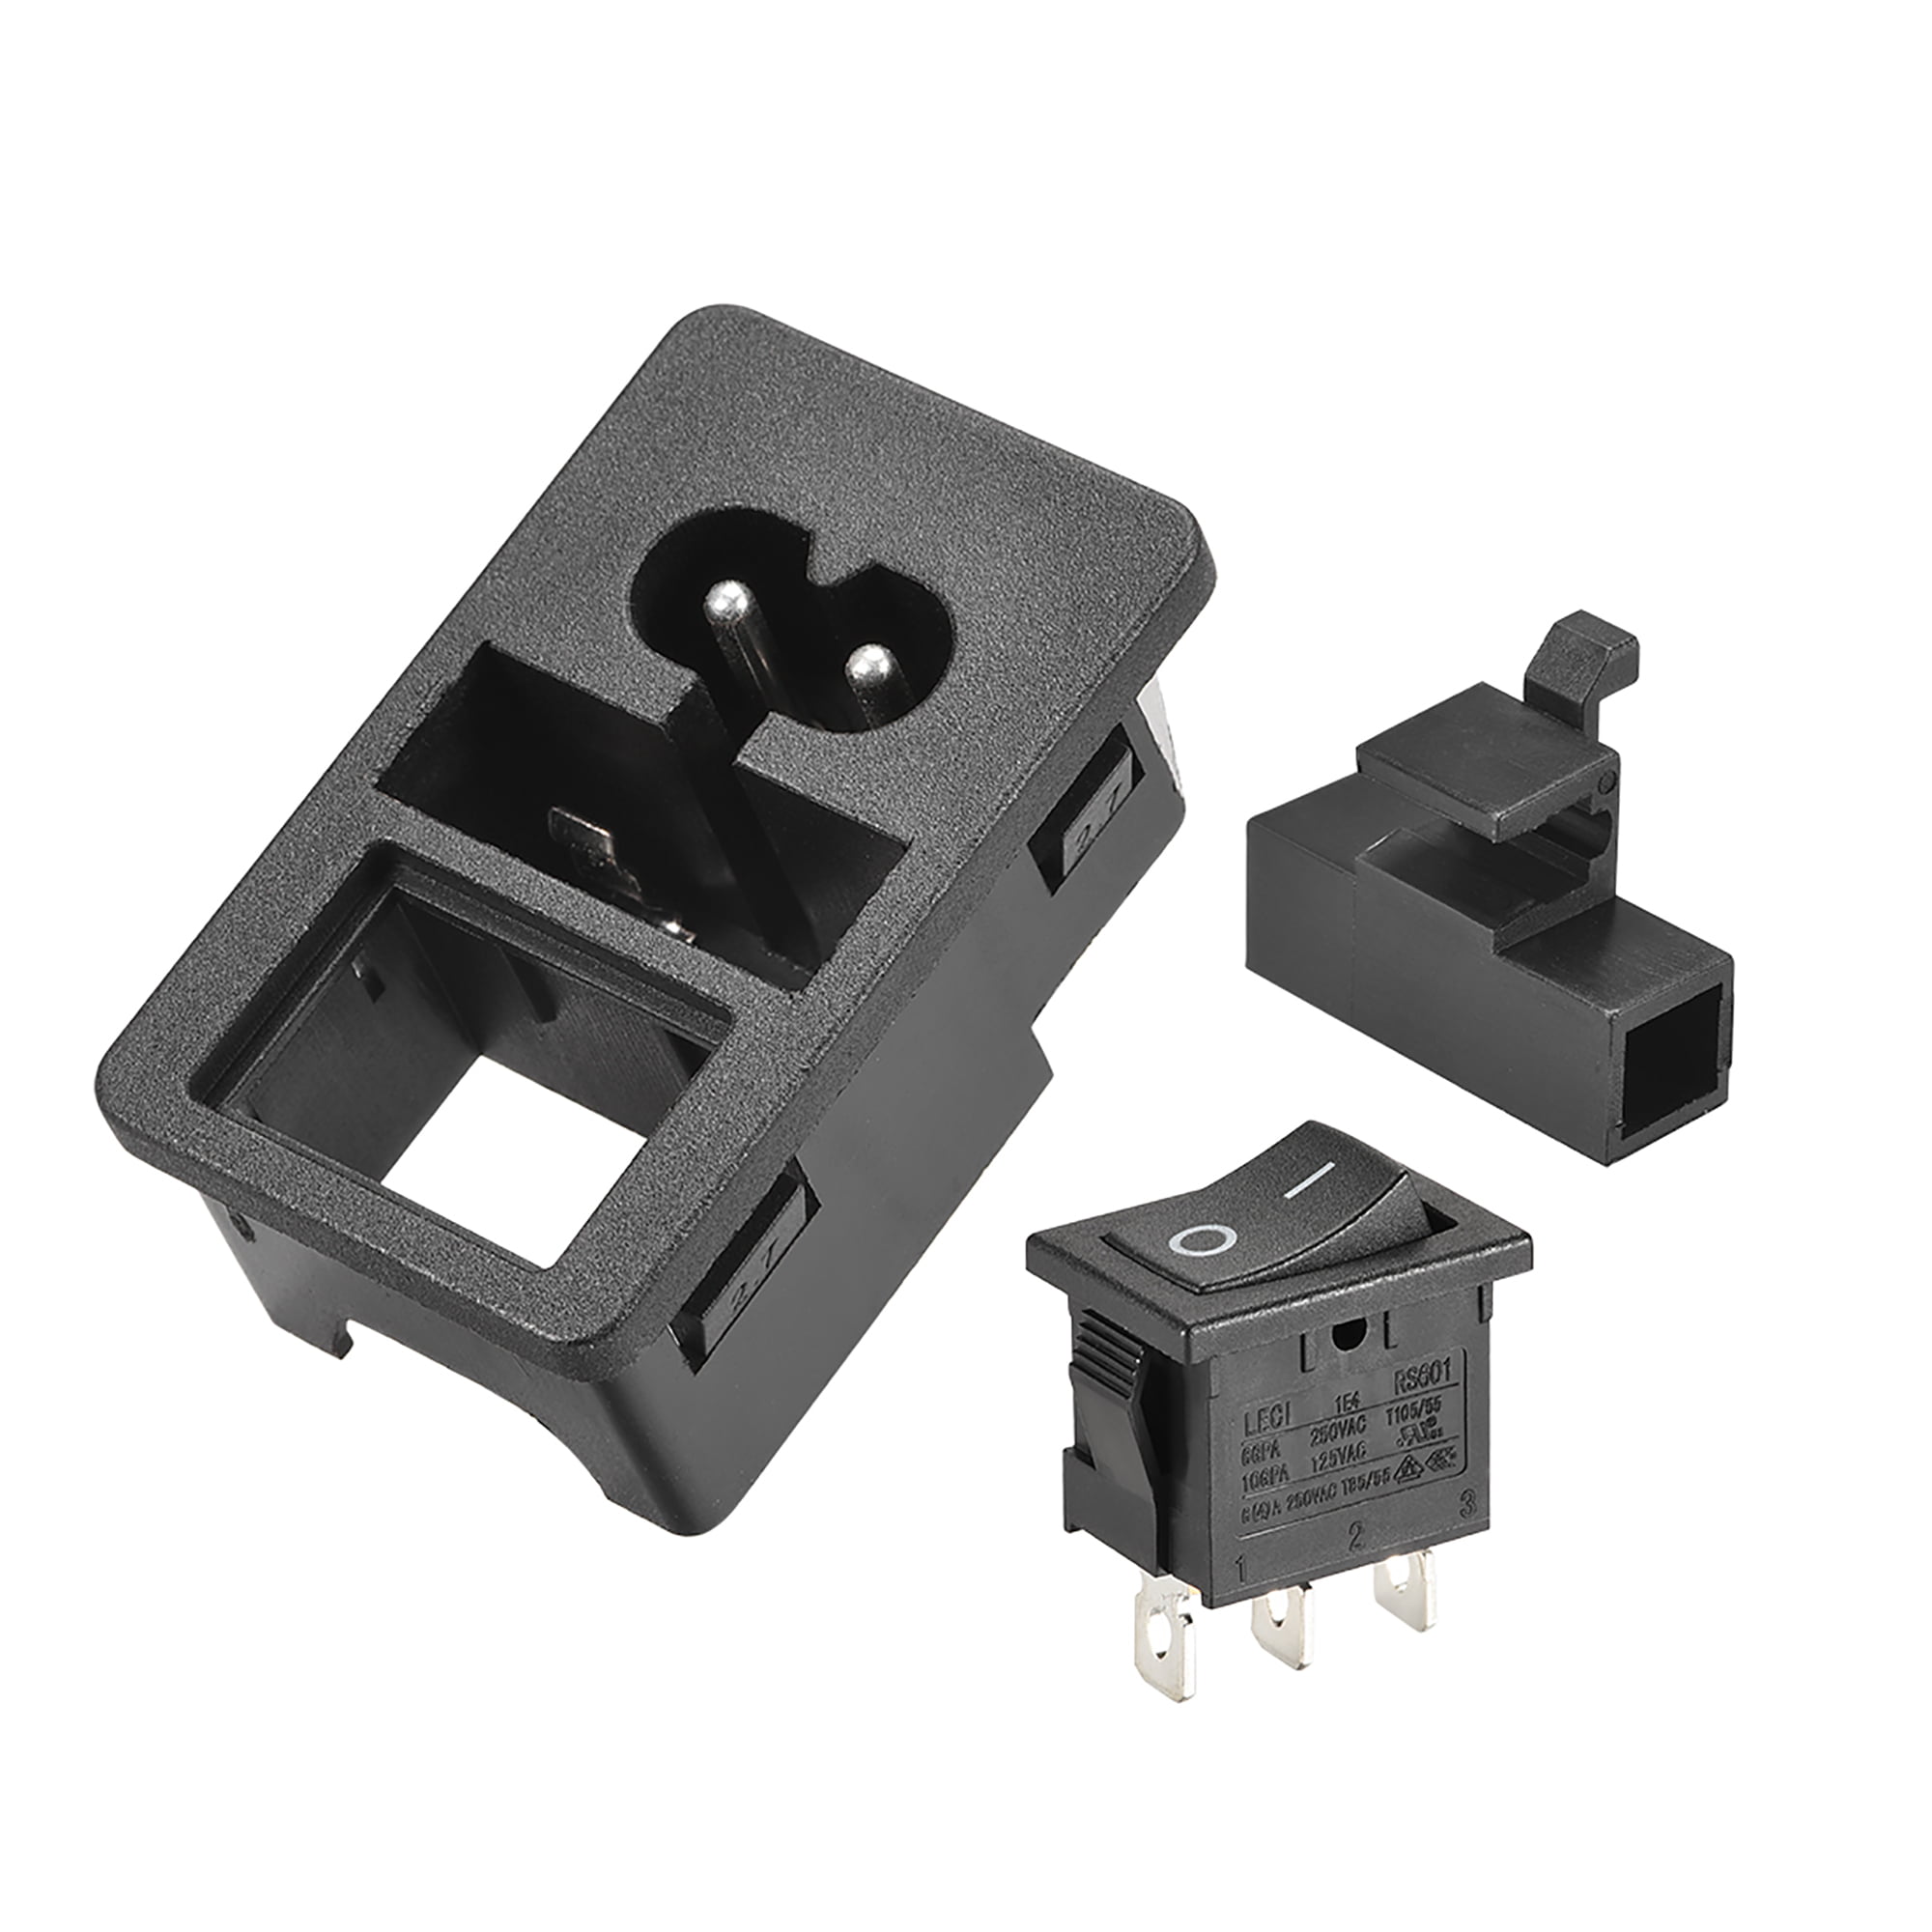 Details about   C8-8 Plug Adapter 250V 10A 2P 2.7mm Buckle IEC Inlet w 3P Switch,Connector